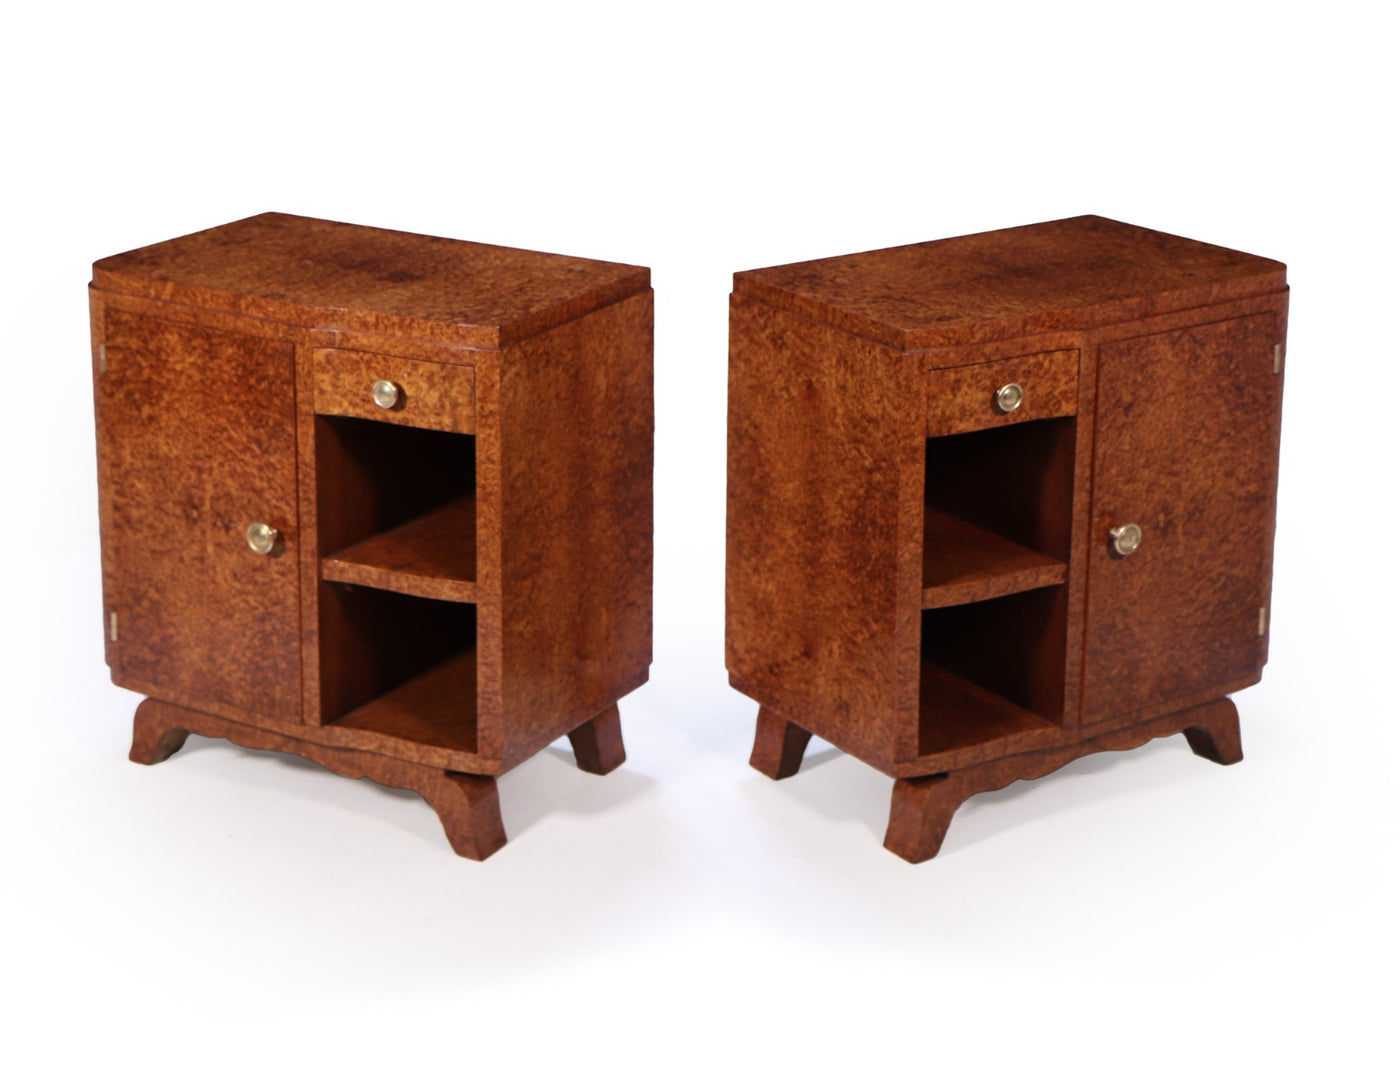 Pair of French art Deco Bedside Cabinets in Amboyna